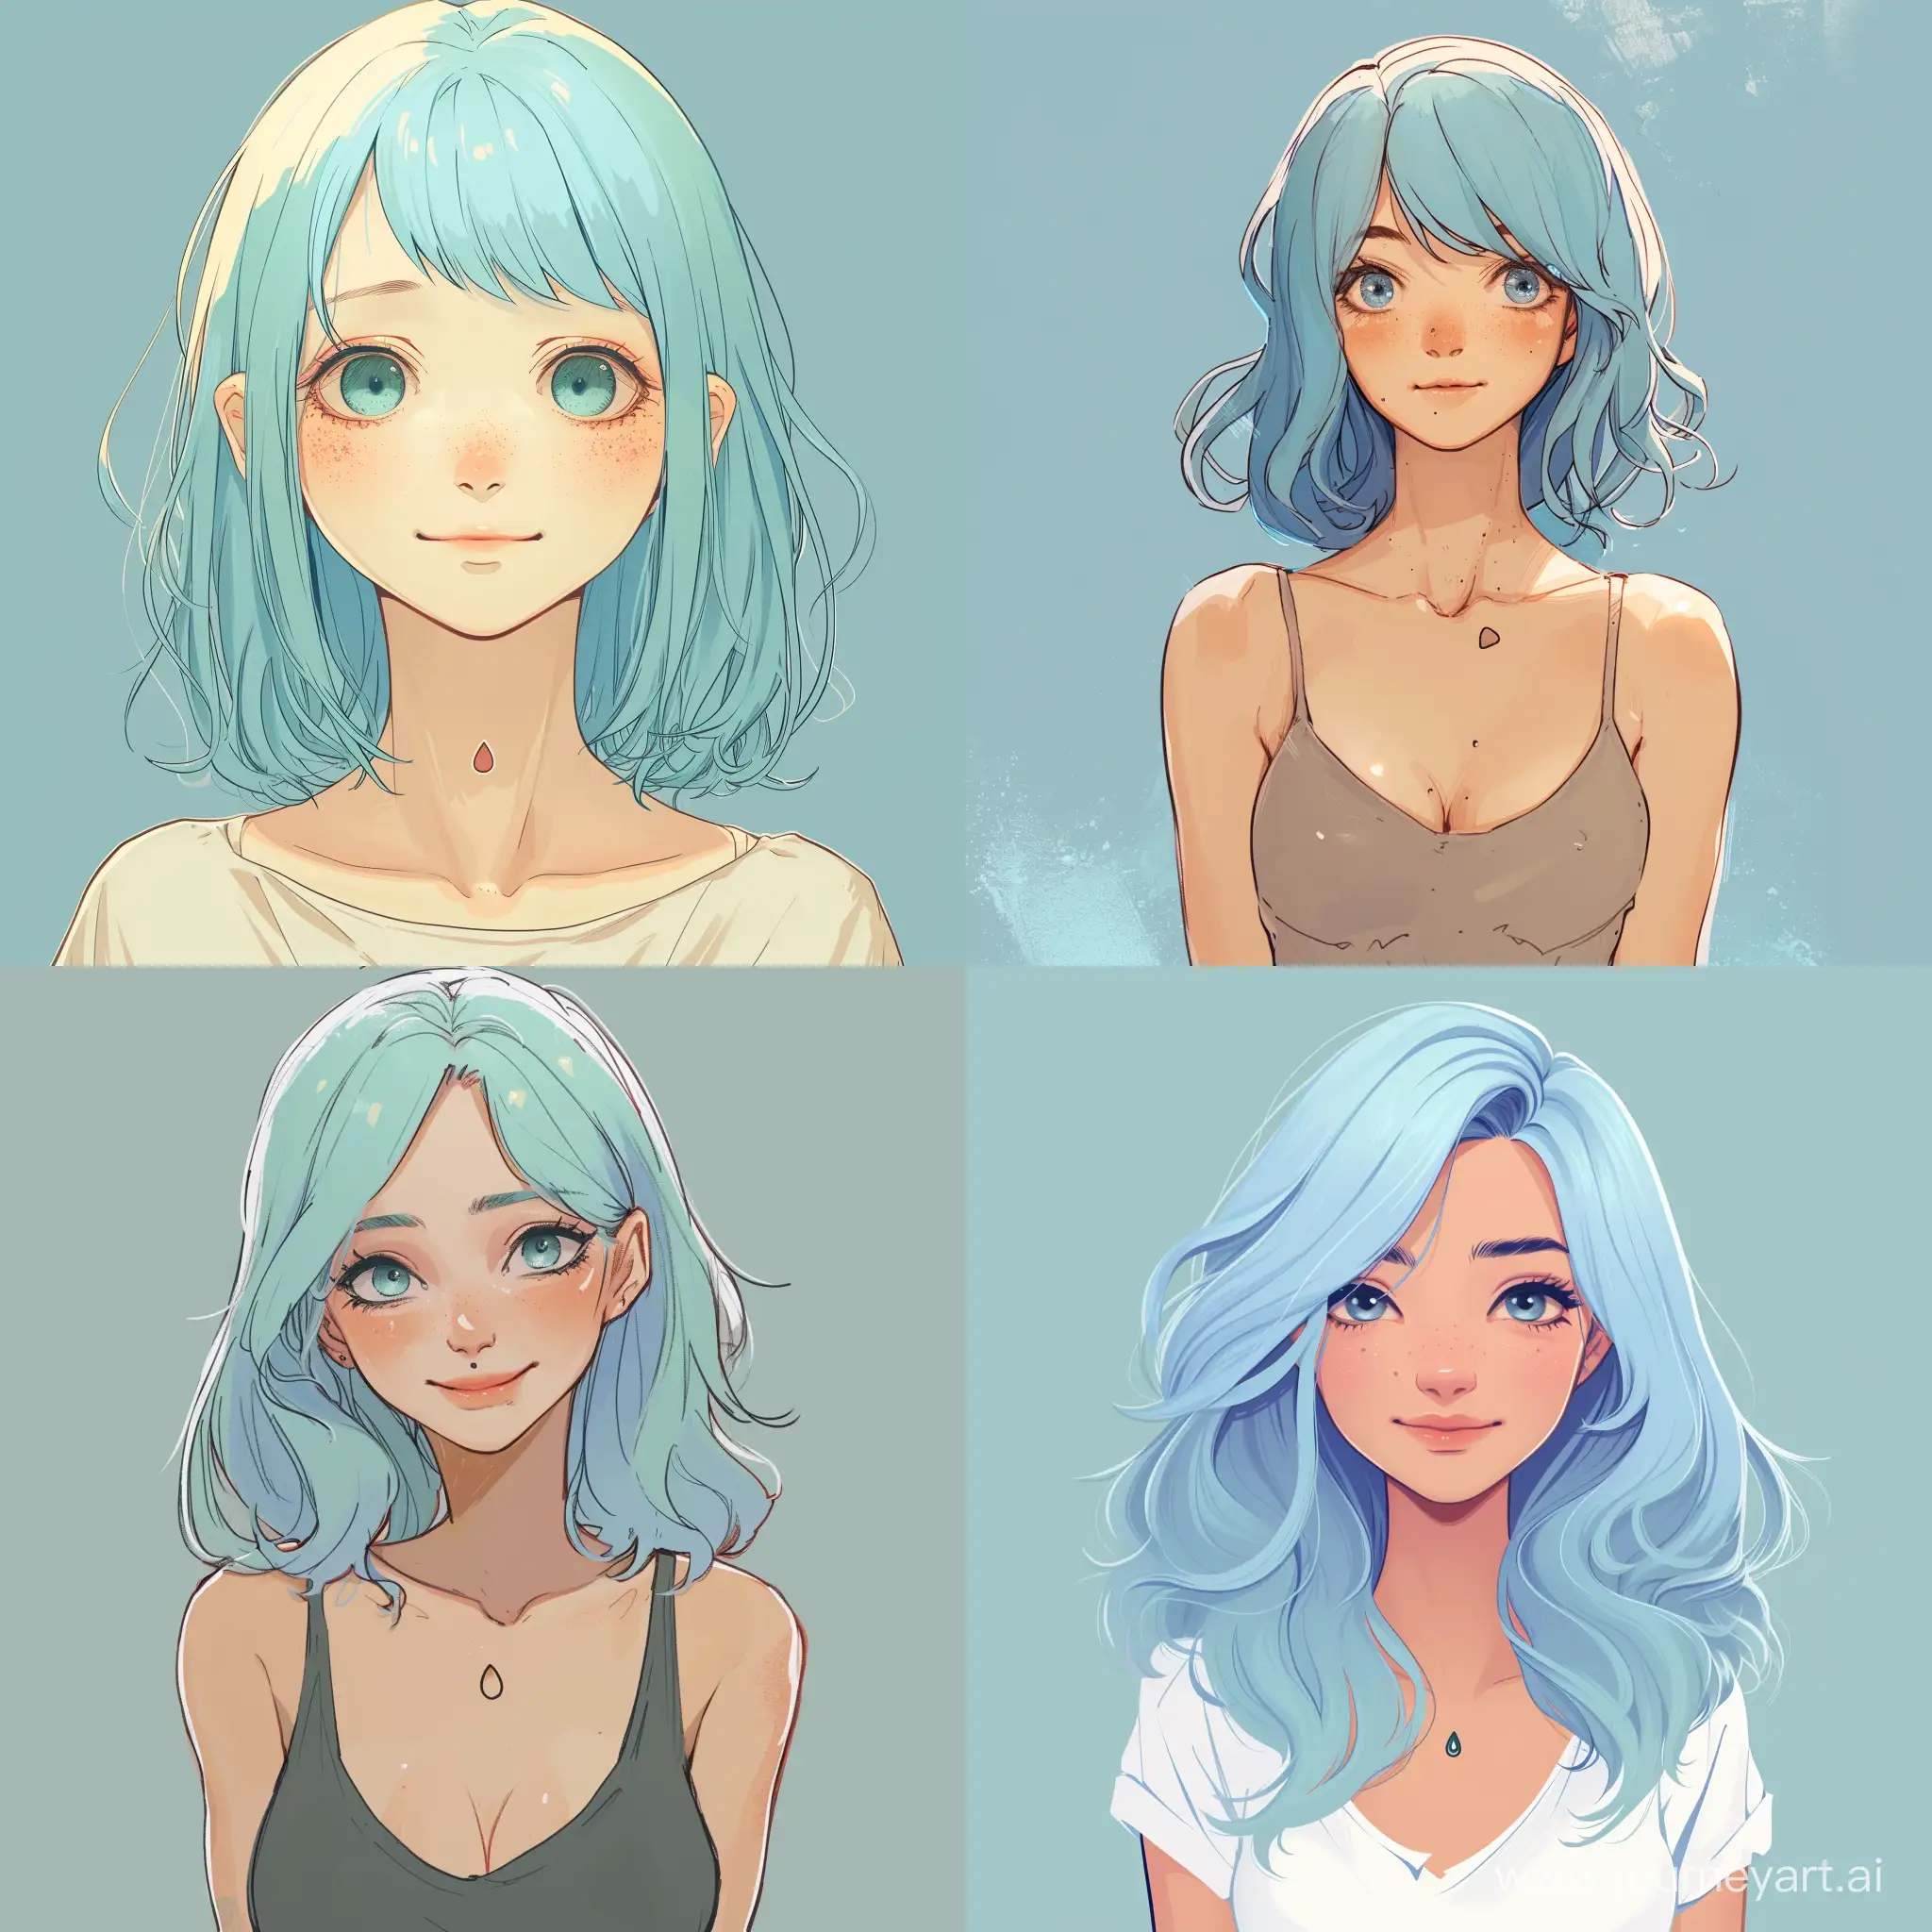 Cheerful-Girl-with-Light-Blue-Hair-and-TeardropShaped-Mole